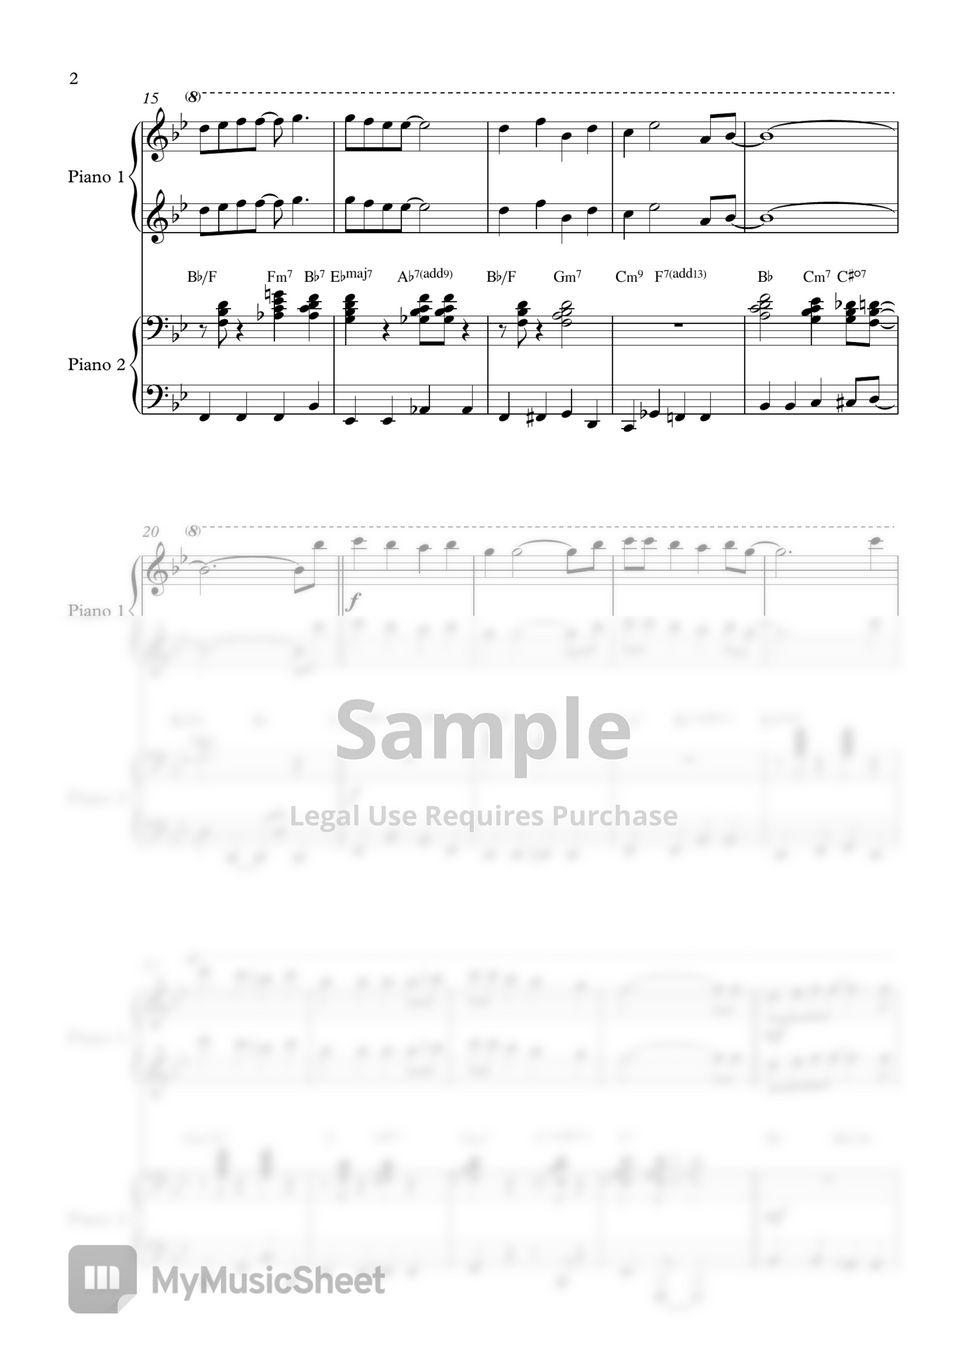 Michael Buble - Santa Claus Is Coming To Town (Piano Sheet+Drum Backing Track) by Pianella Piano